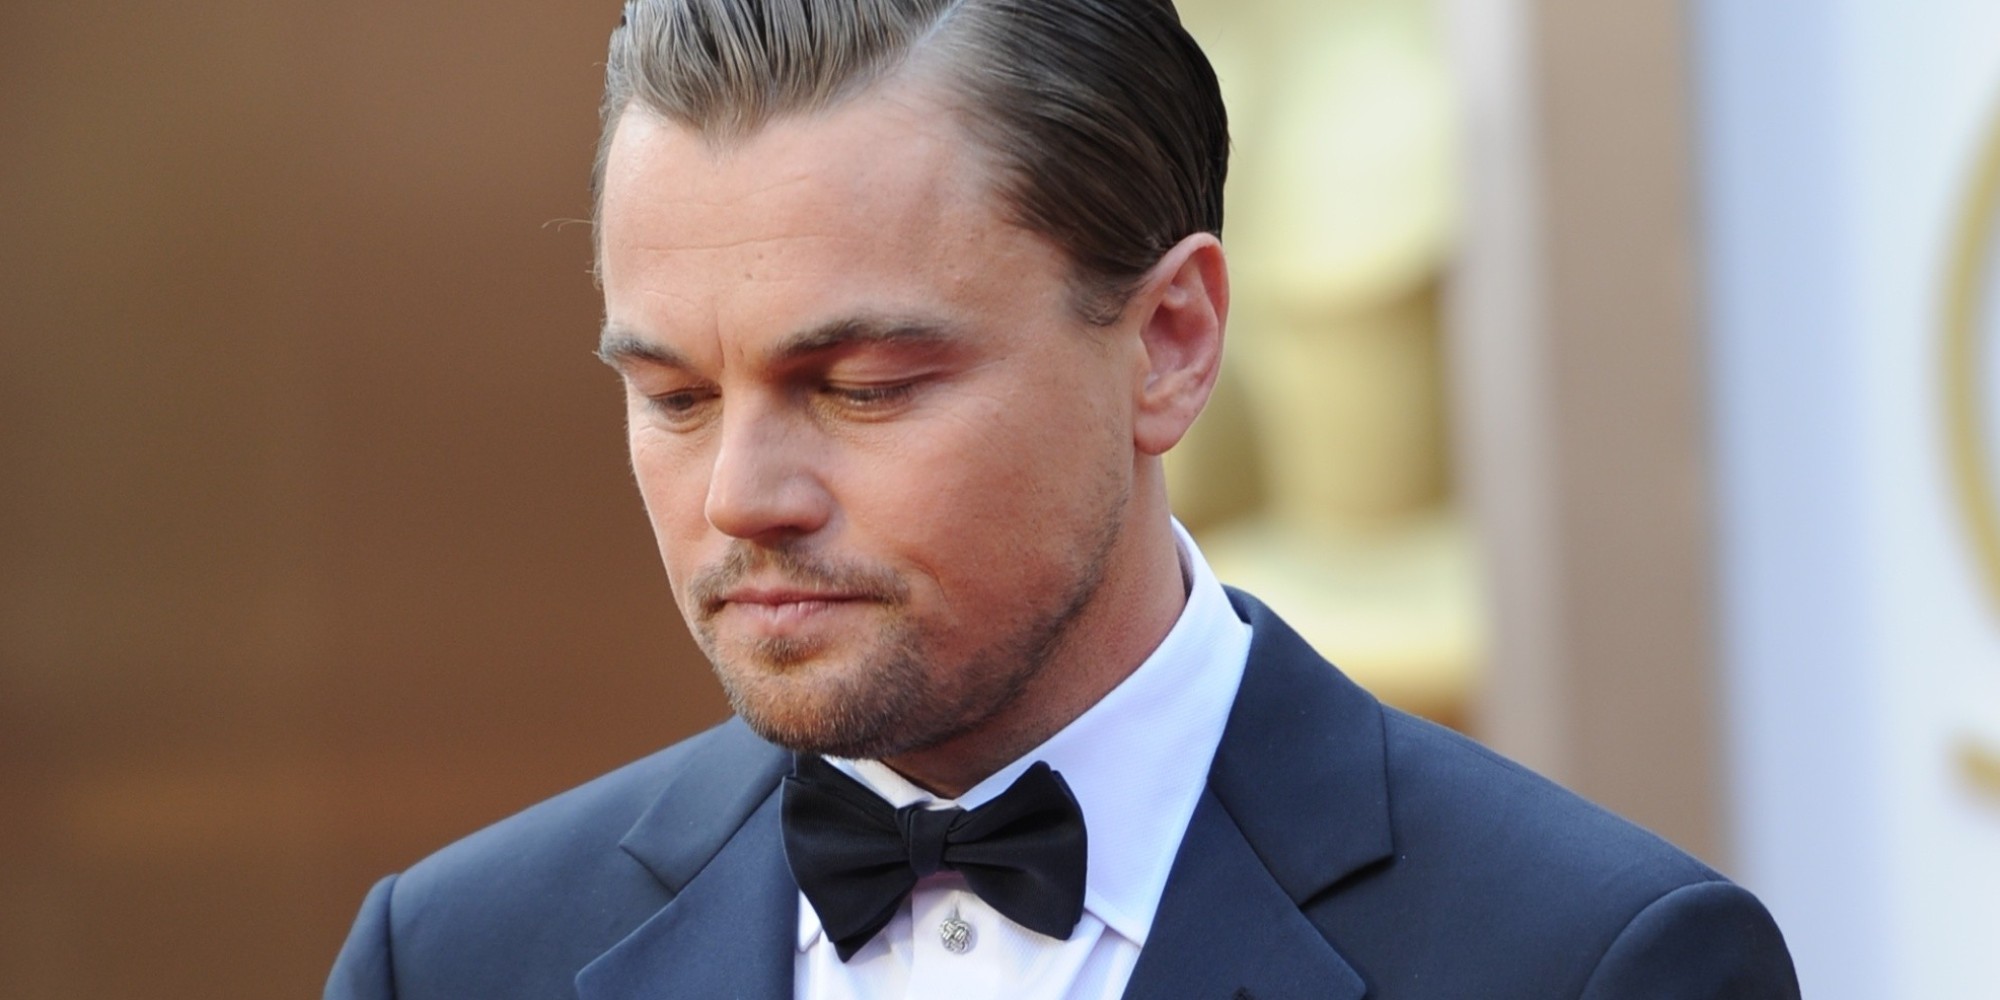 Watching Leonardo DiCaprio Lose The Best Actor Oscar Is Even Sadder The Second Time ...